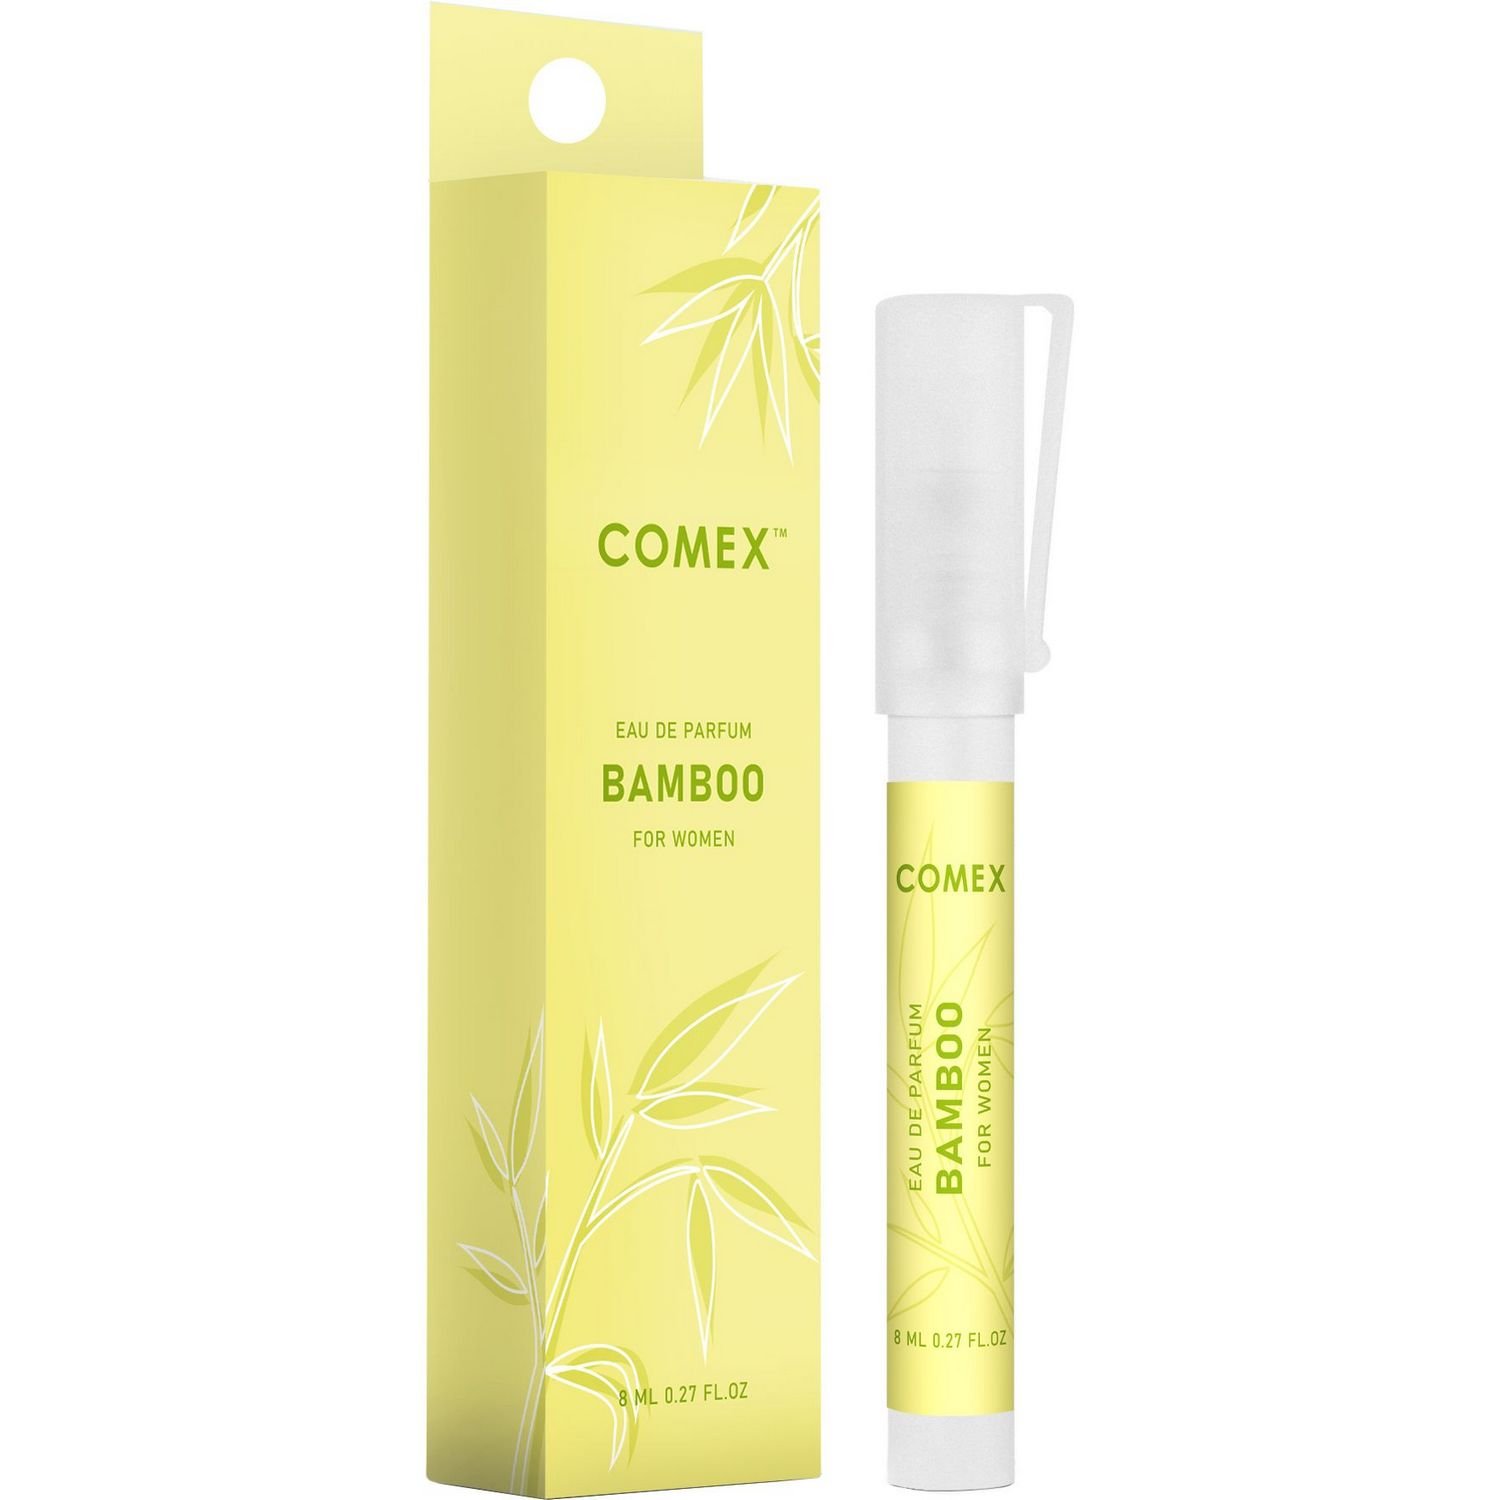 Парфюмерная вода Comex For women Bamboo, 8 мл - фото 1